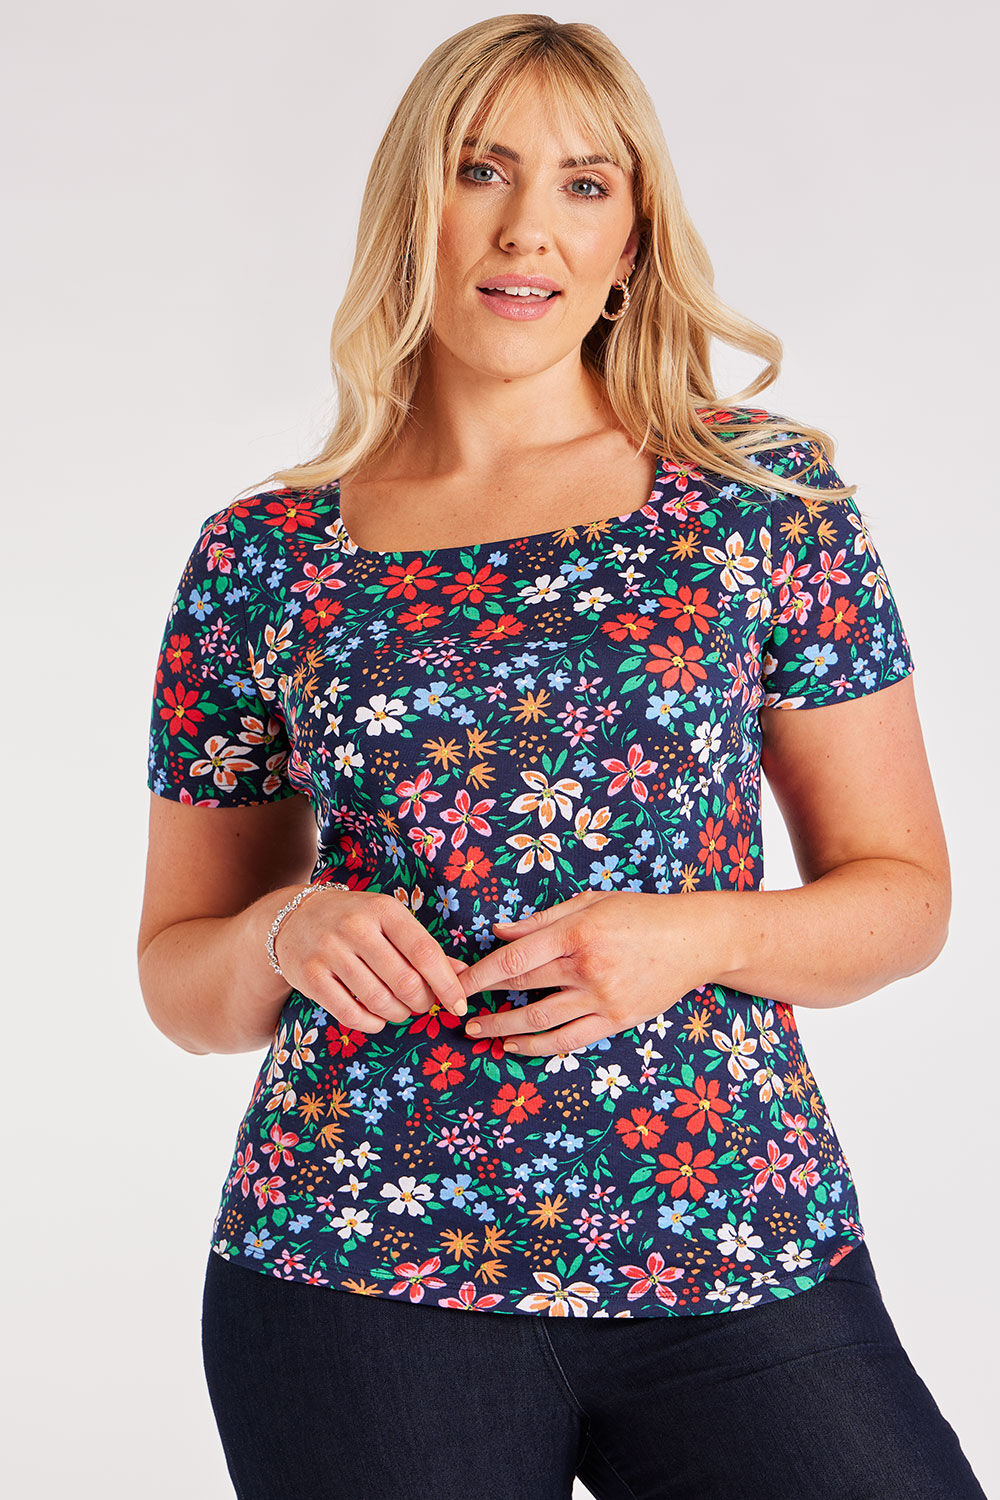 Plus Size Tops & T-Shirts for Women | Plus Size Summer Tops